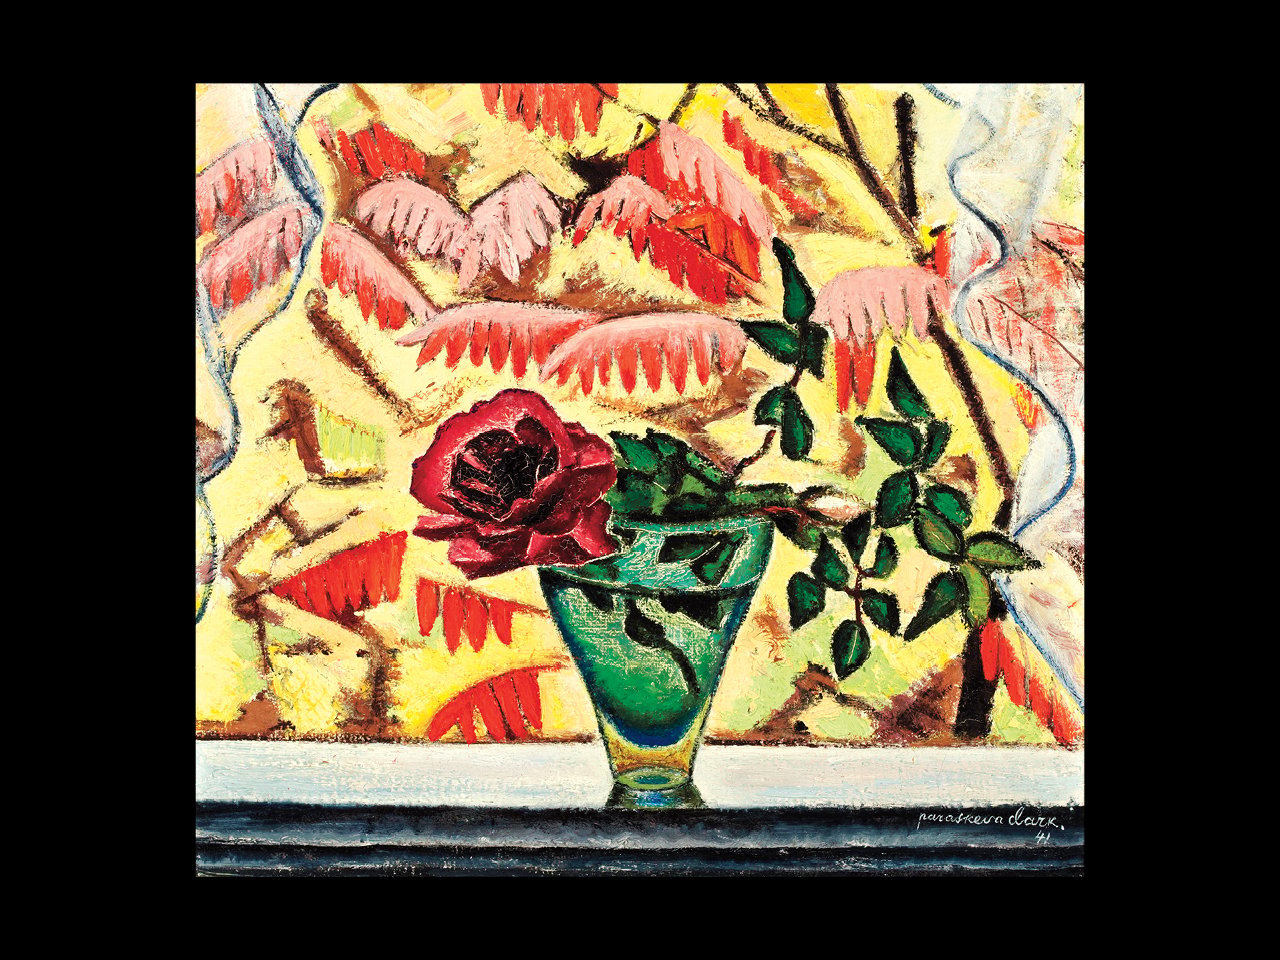 A photo of the painting "October Rose" by Paraskeva Clark, a red rose in a green vase on a yellow background